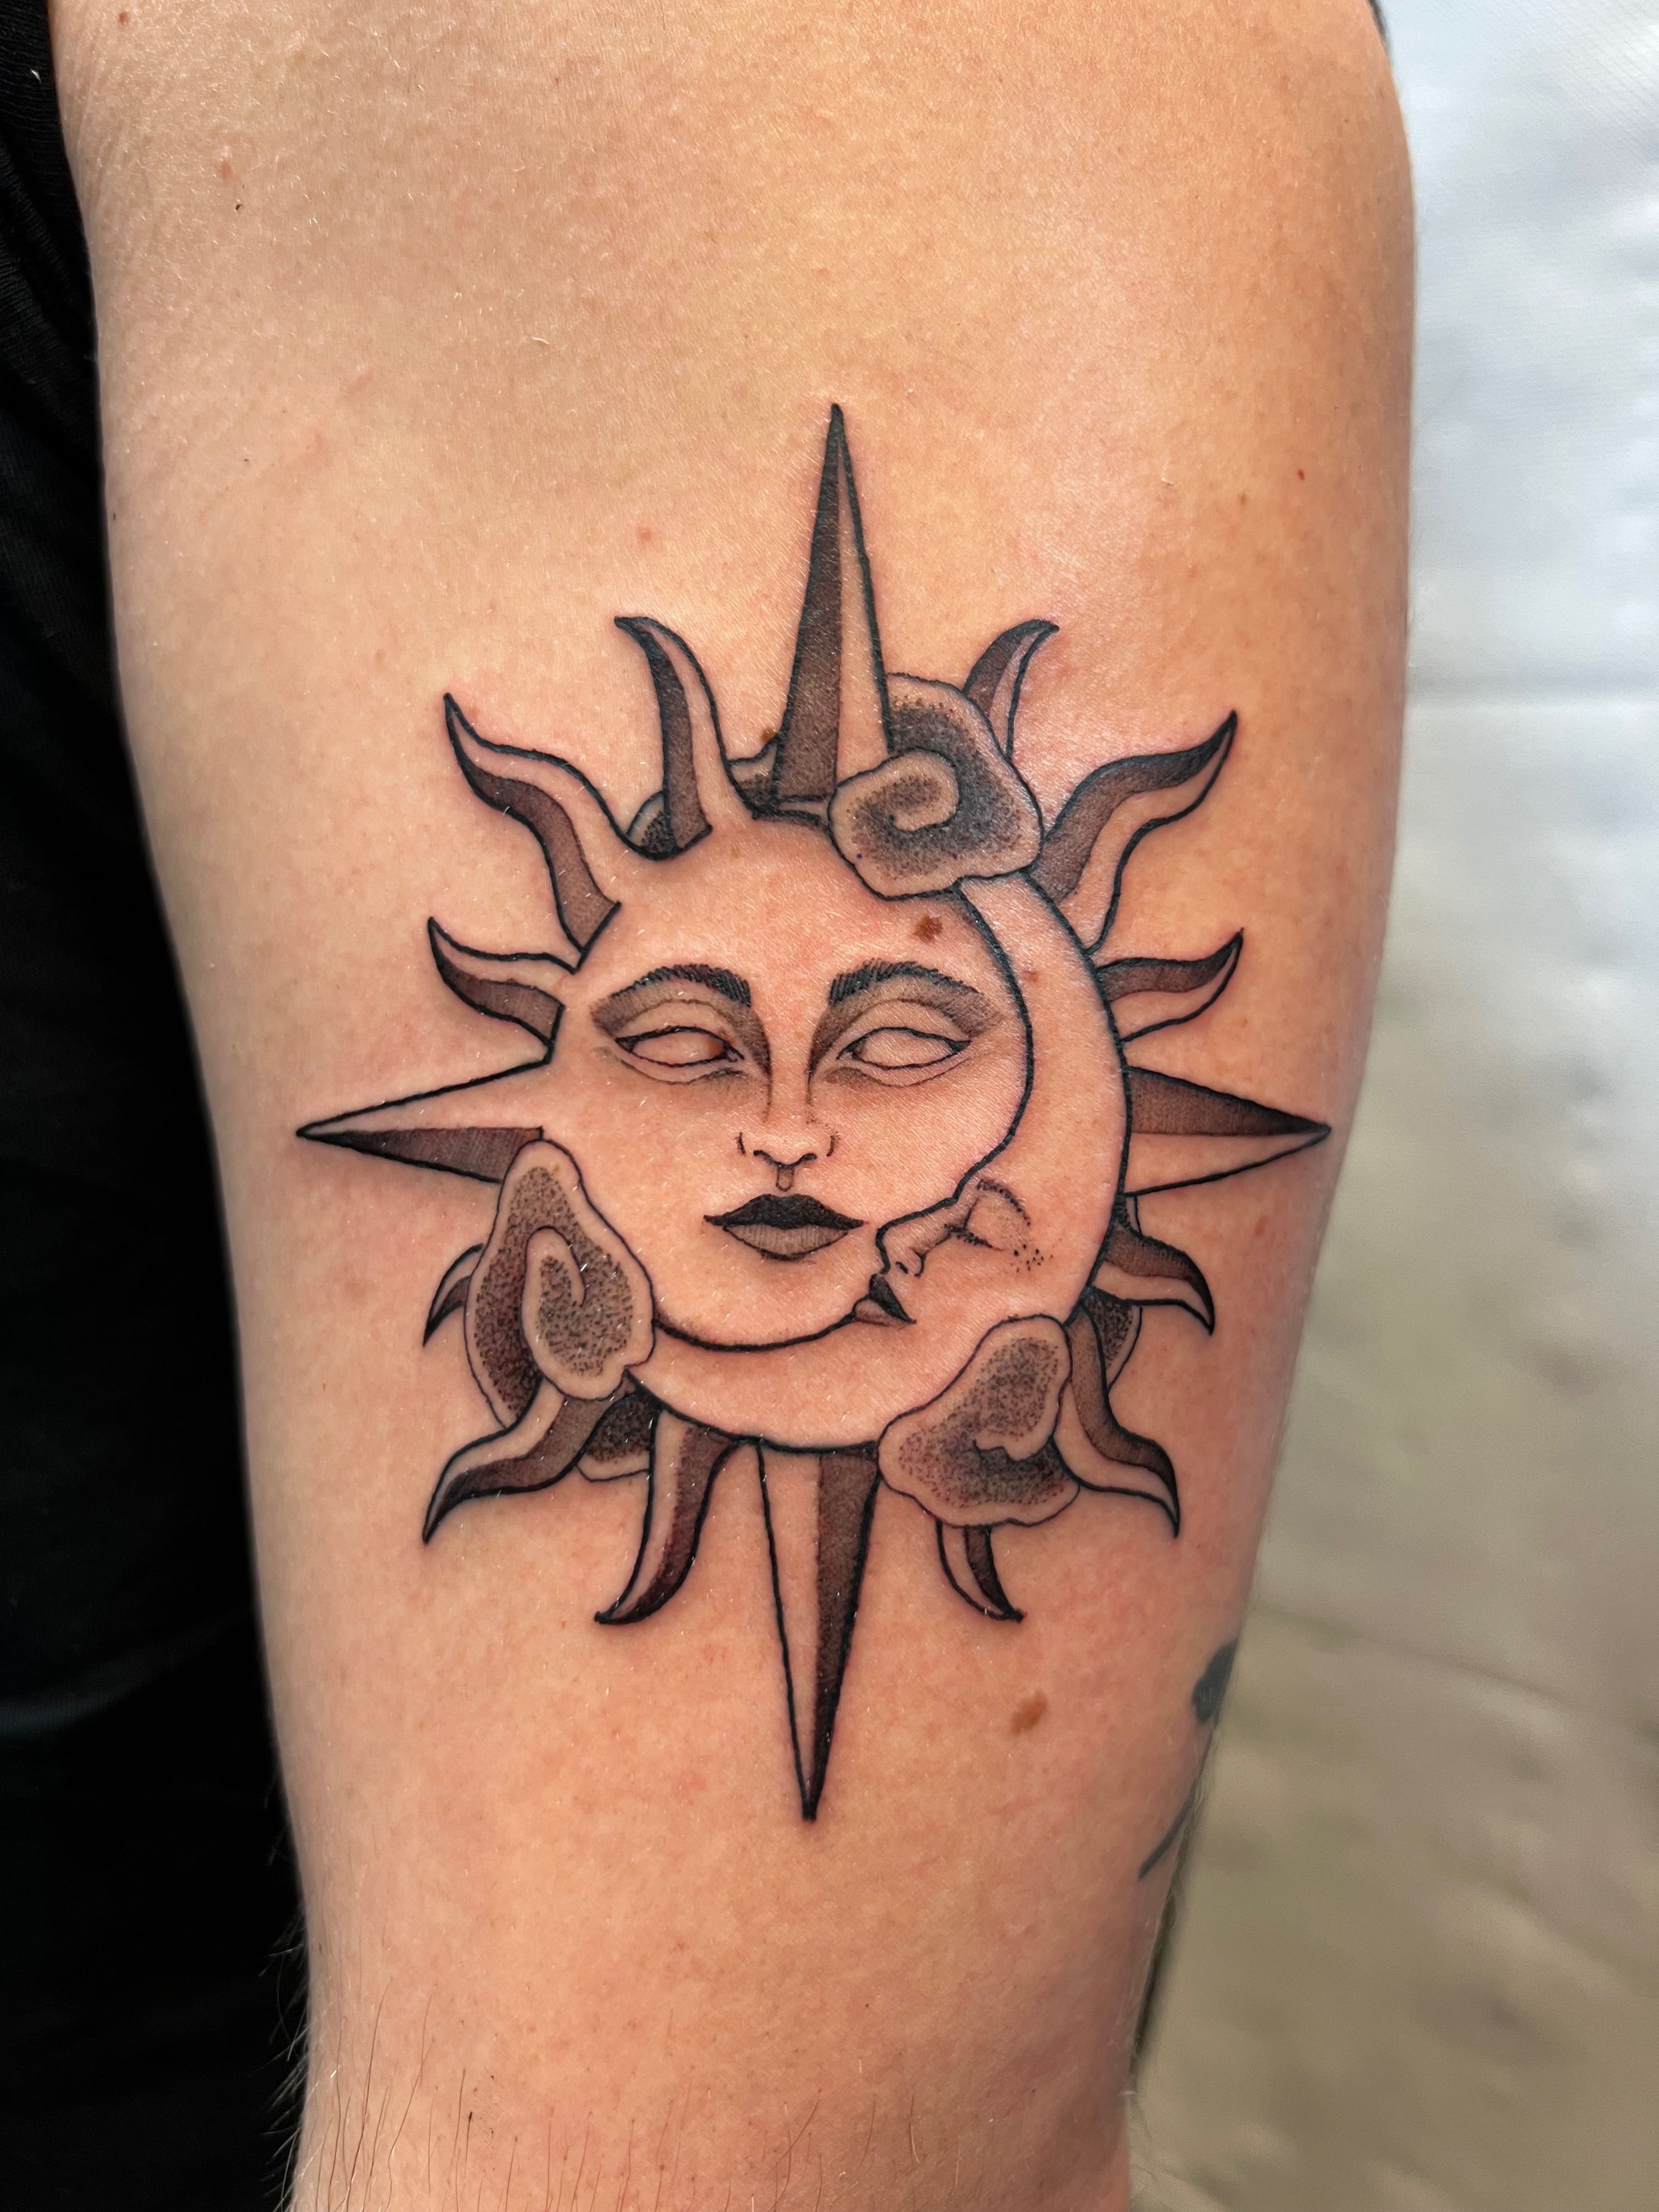 In some religions the sun and moon... - Danish Tattooz House | Facebook